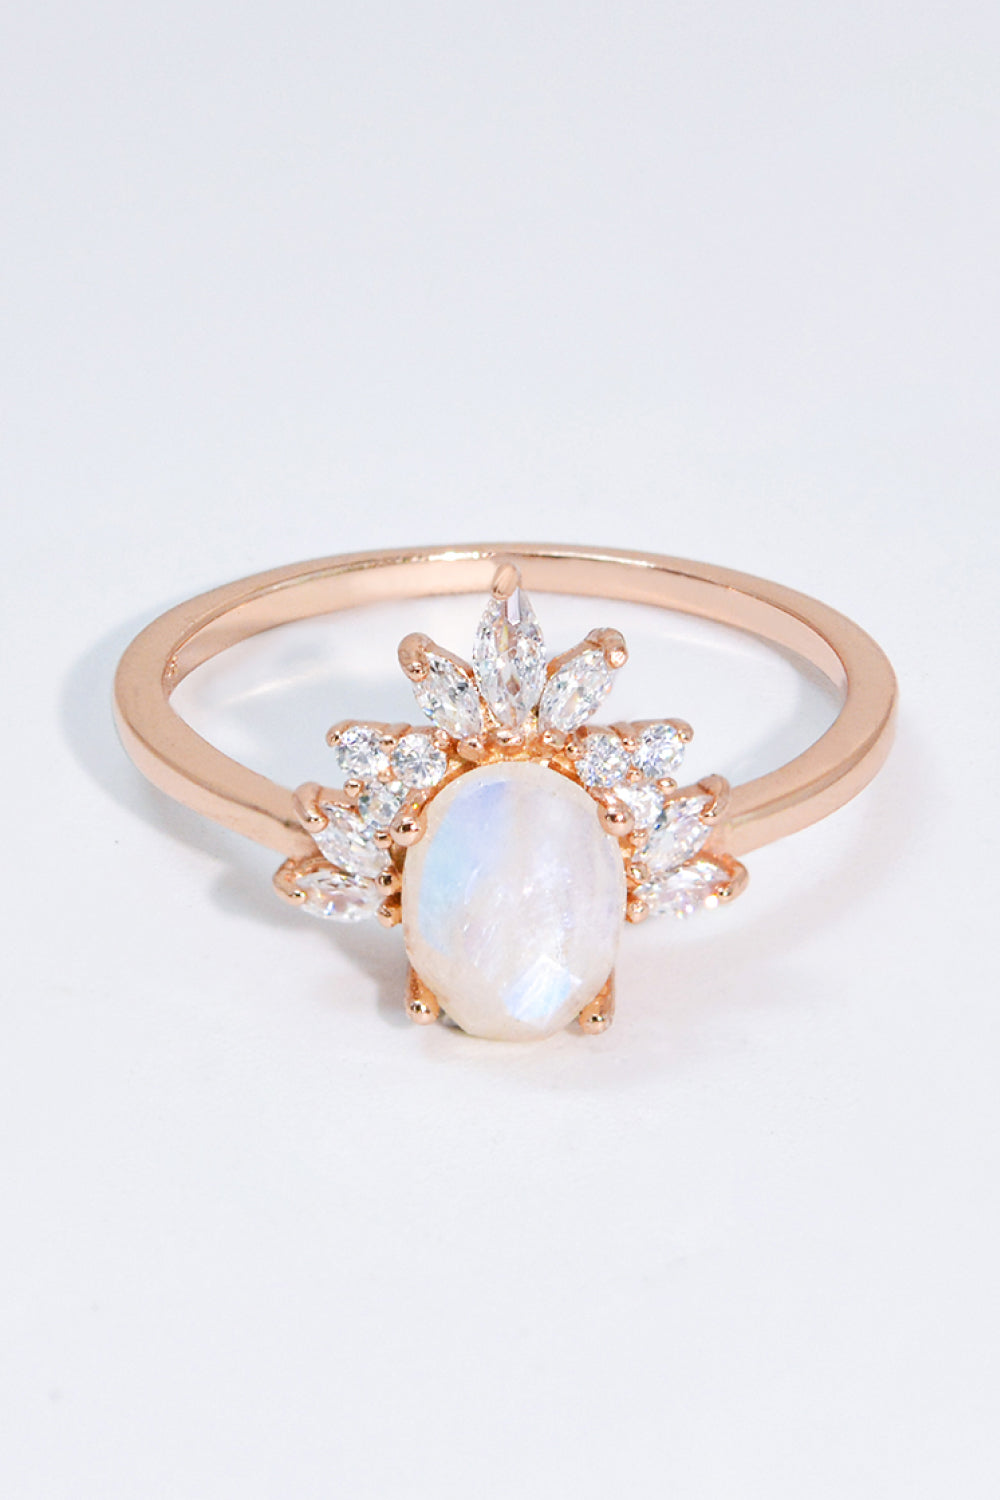 Lavender 18K Rose Gold-Plated Natural Moonstone Ring Sentient Beauty Fashions rings